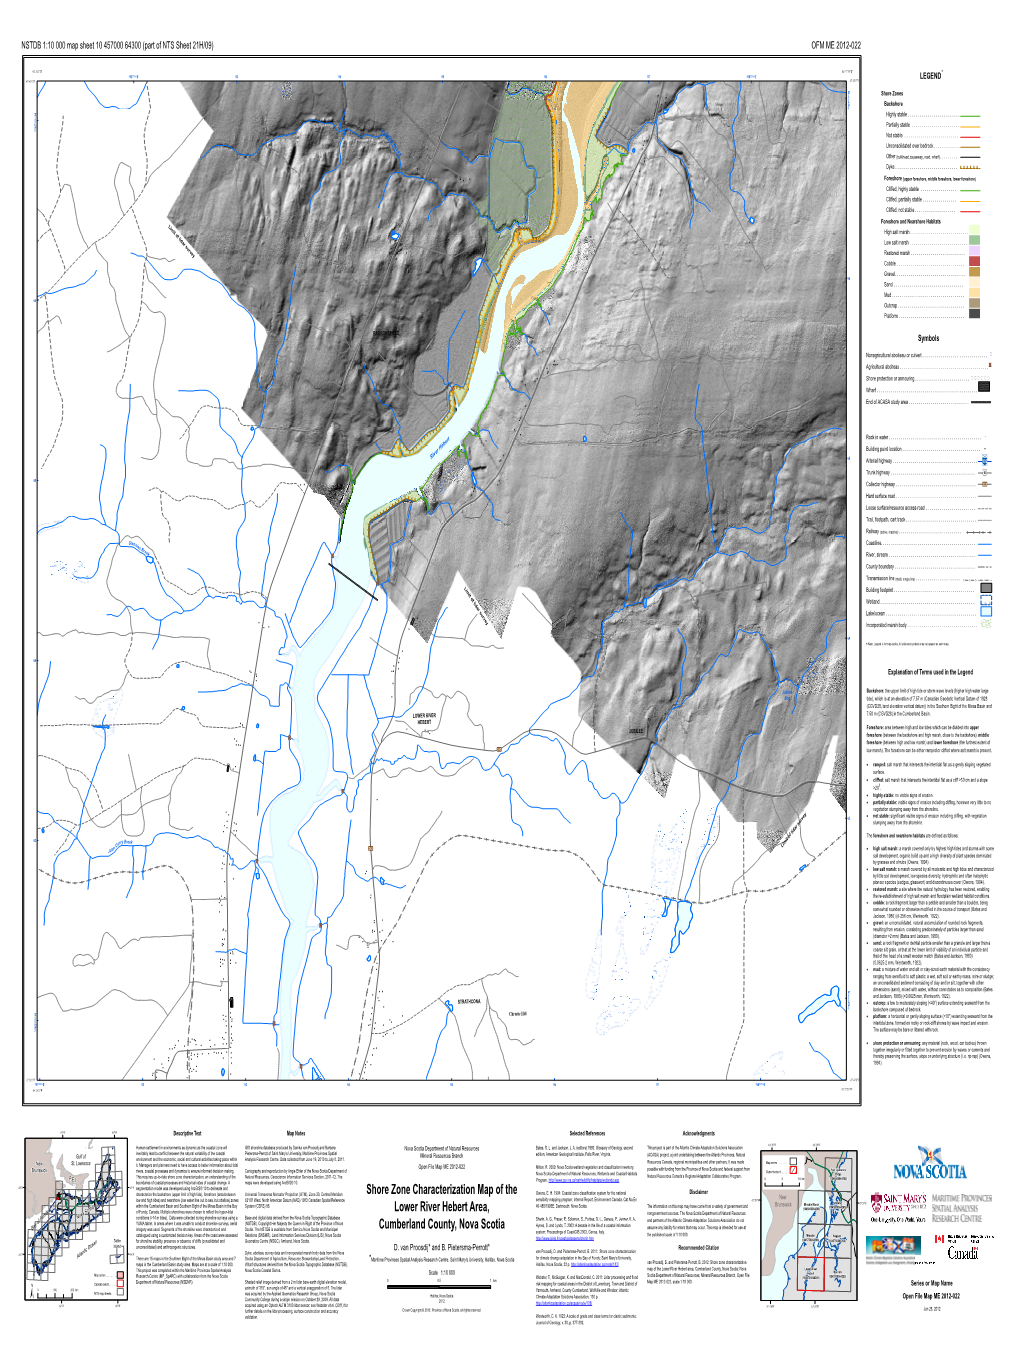 Open File Map ME 2012-022: Shore Zone Characterization Map of The